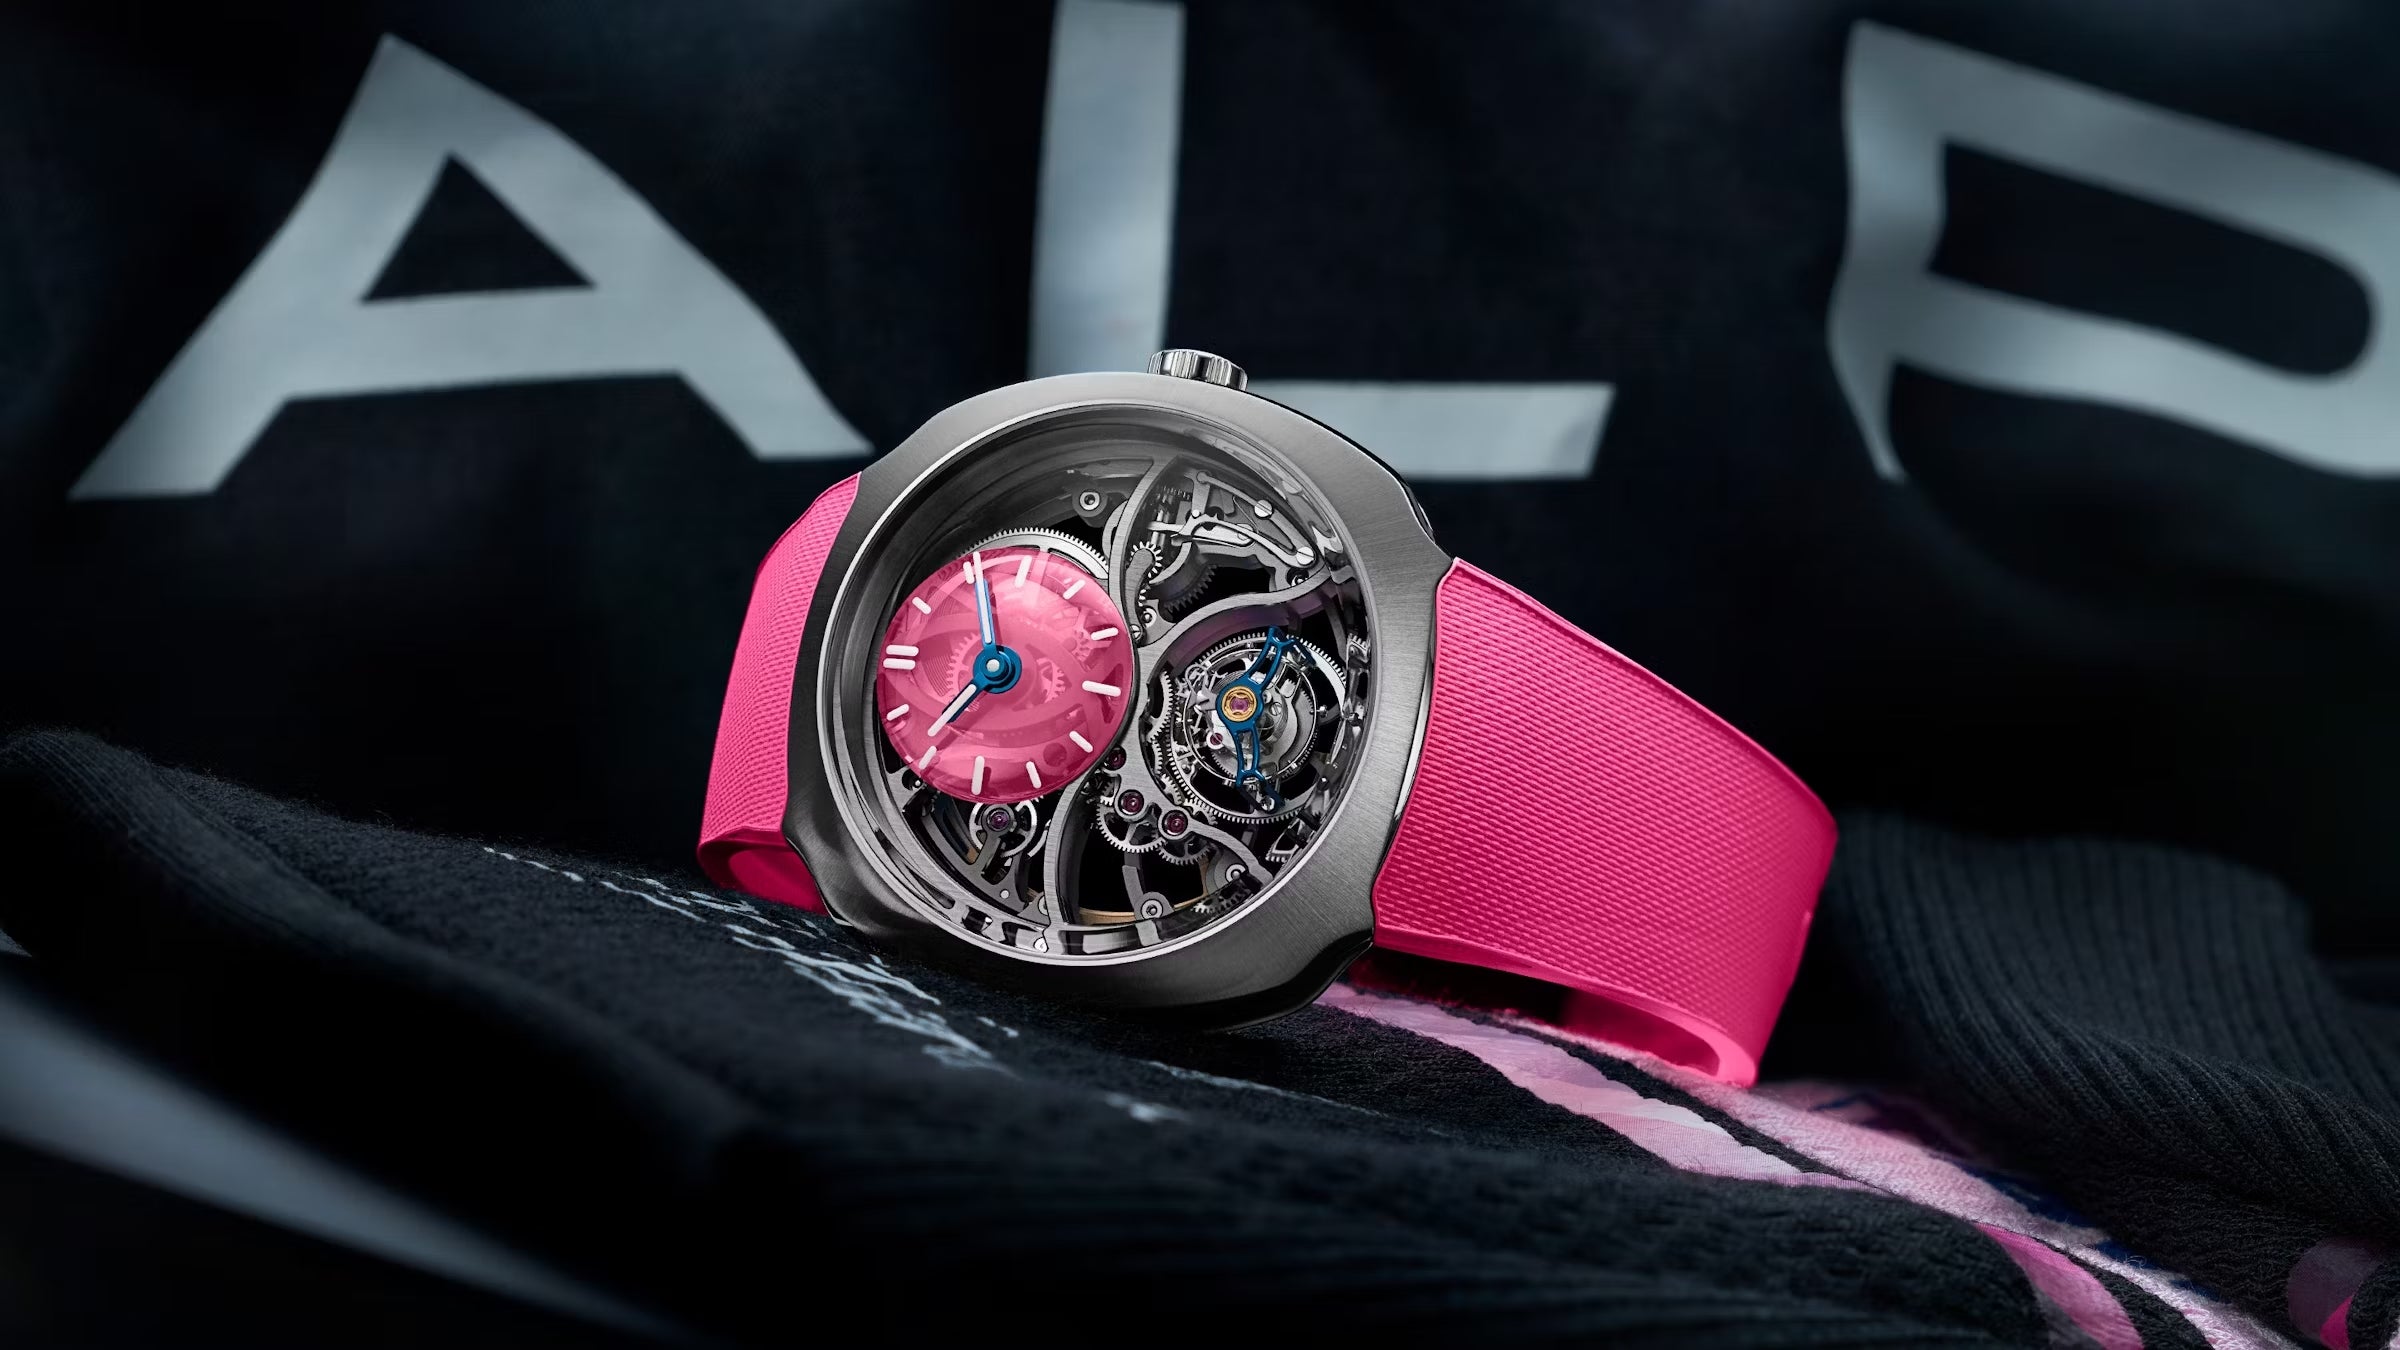 H. Moser & Cie's Streamliner Cylindrical Tourbillon Skeleton Alpine Limited Edition Pink Livery"